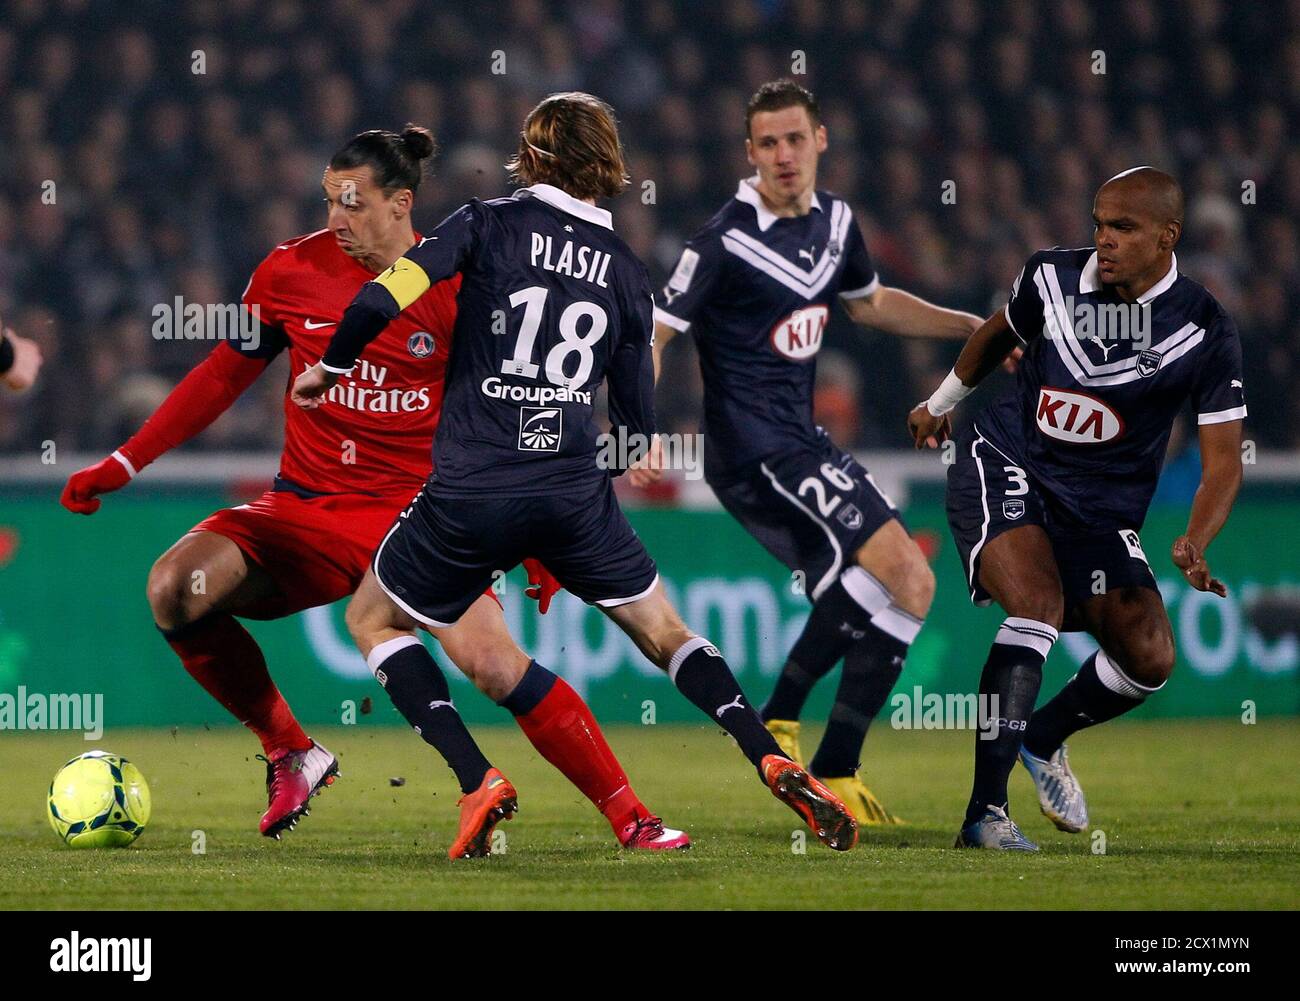 Paris Saint-Germain's Zlatan Ibrahimovic (L) challenges Bordeaux's Jaroslav  Plasil (C) as Henrique Dit (R) and Gregory Sertic (2ndR) look on during  their French Ligue 1 soccer match at the Chaban Delmas Stadium